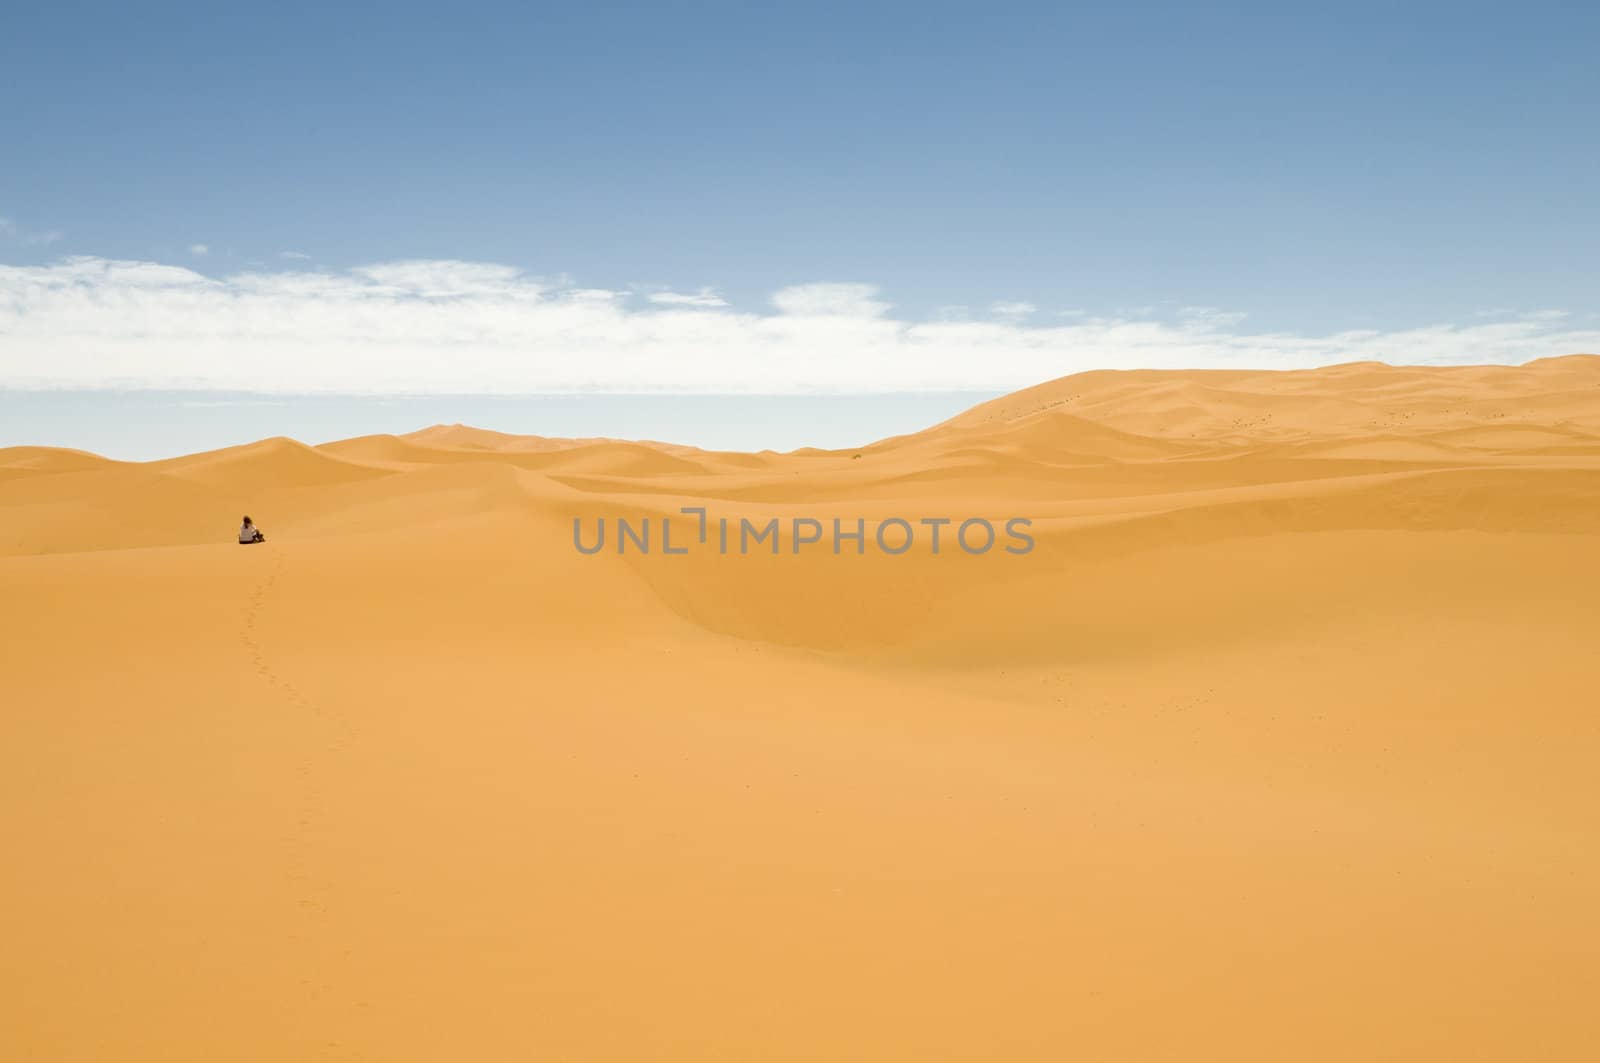 Into the desert by faberfoto